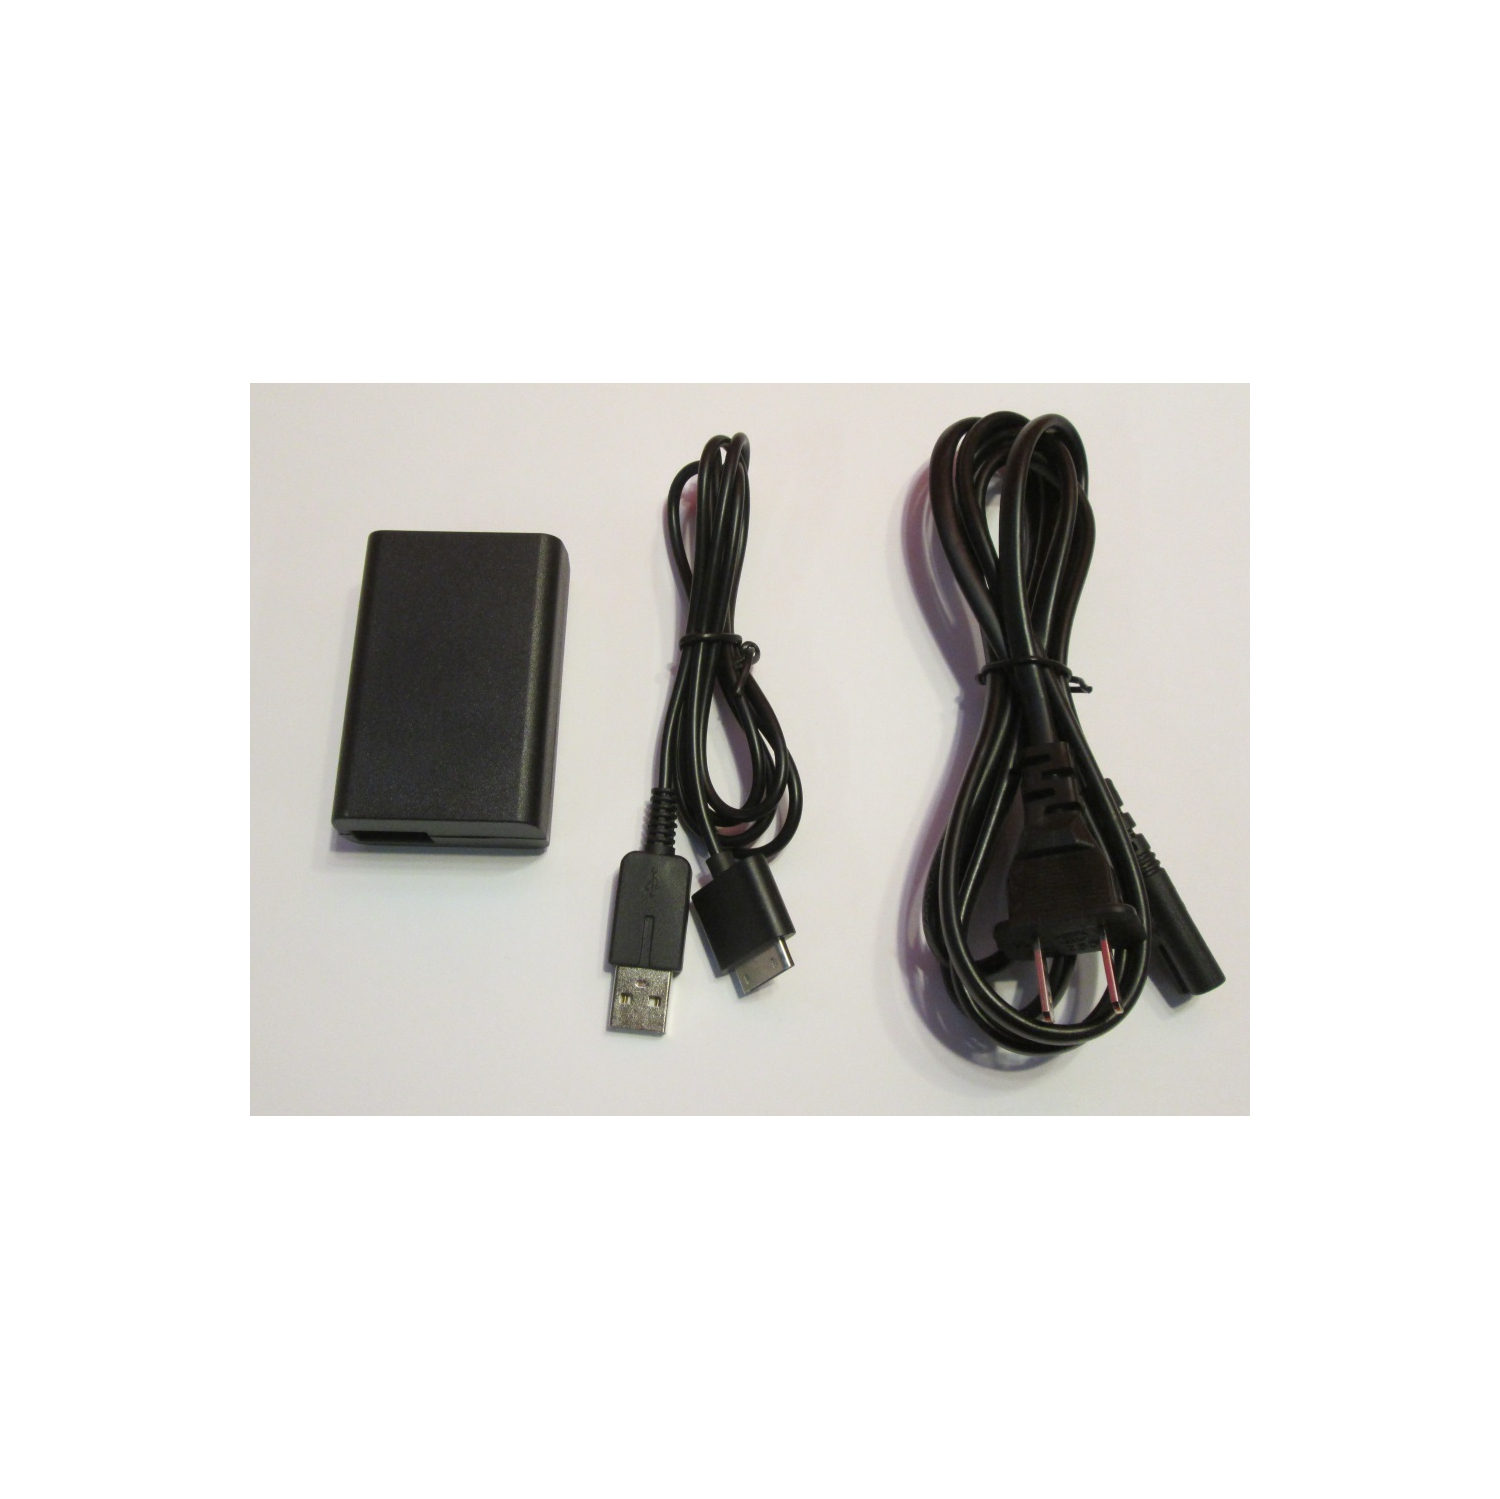 Wall Charger Power Adapter for Sony PSP Go by Mars Devices